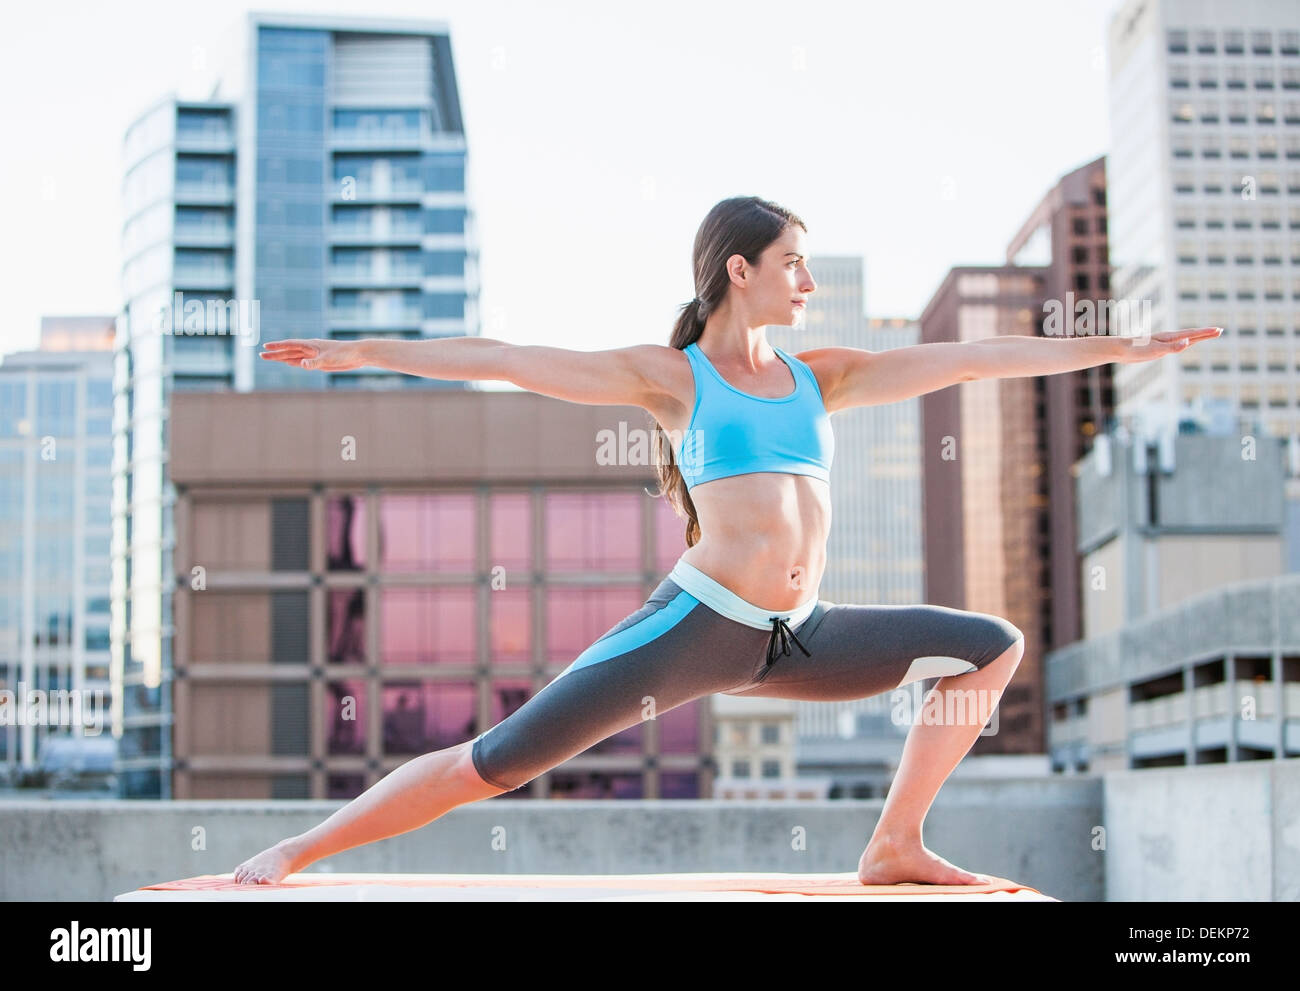 Caucasian woman practicing yoga on urban rooftop Banque D'Images